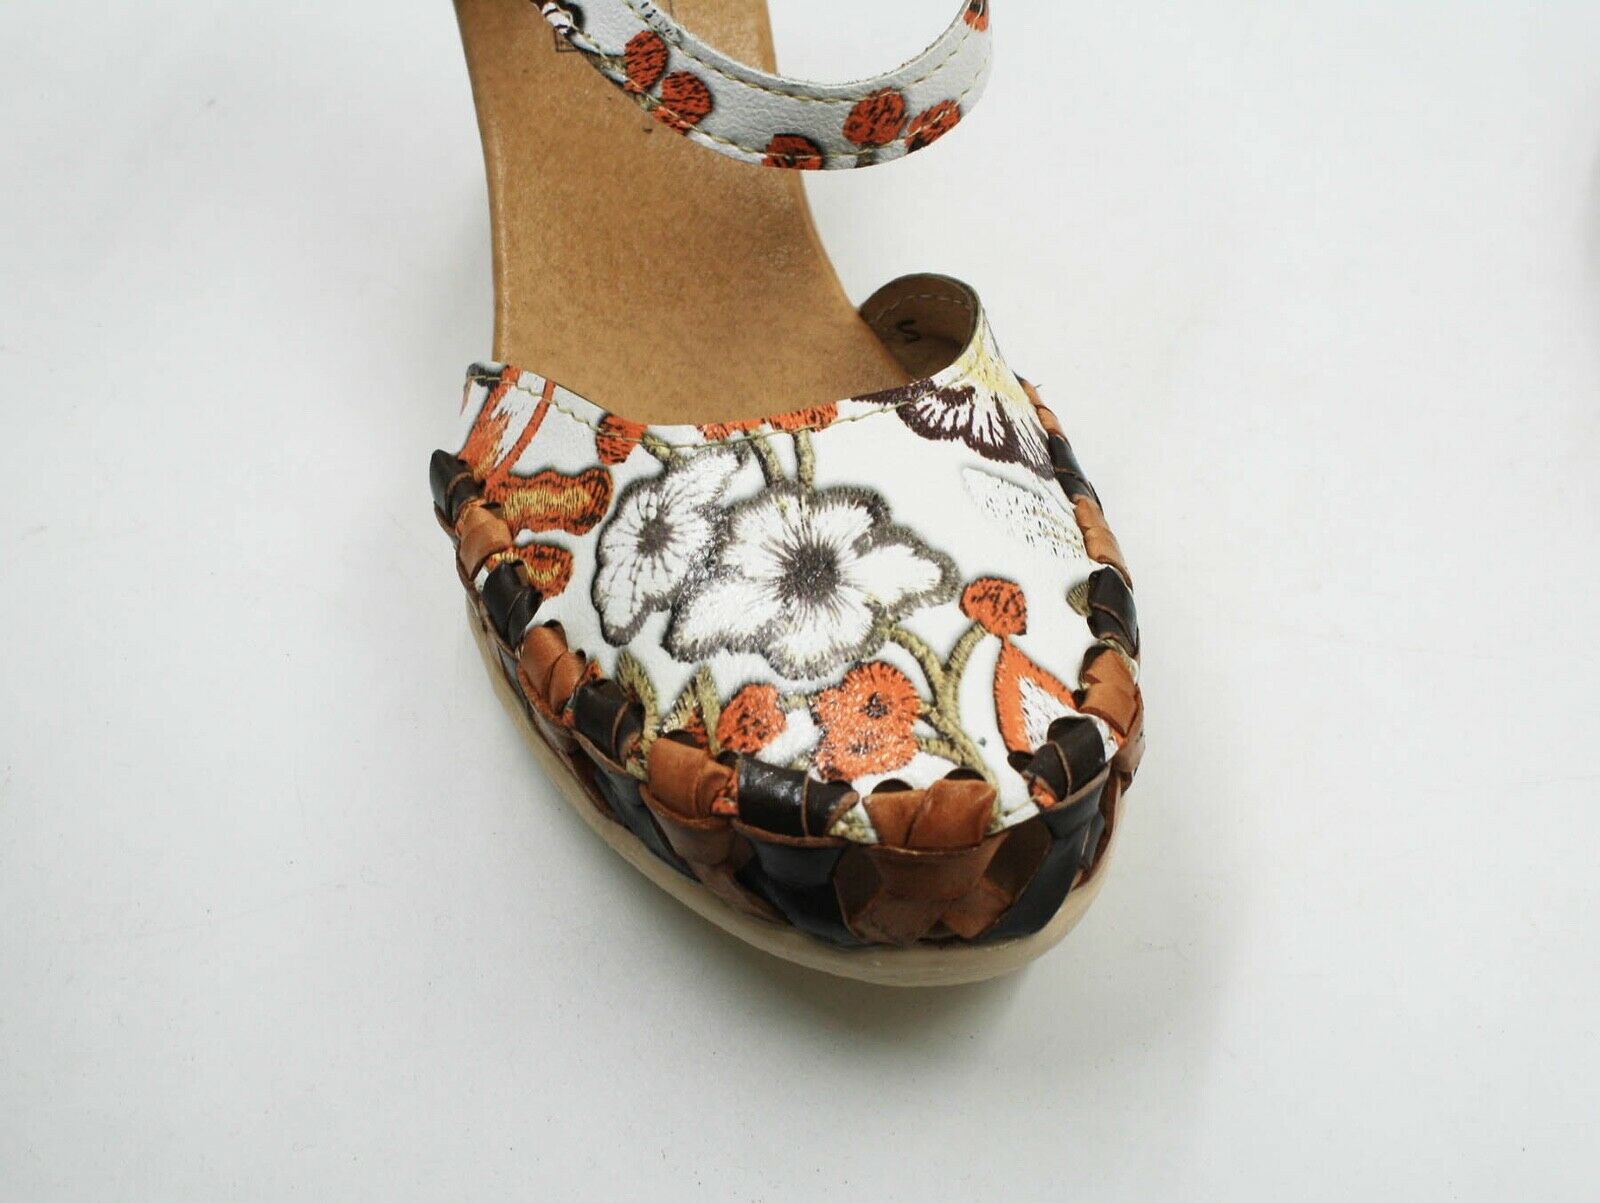 mexican flower sandals